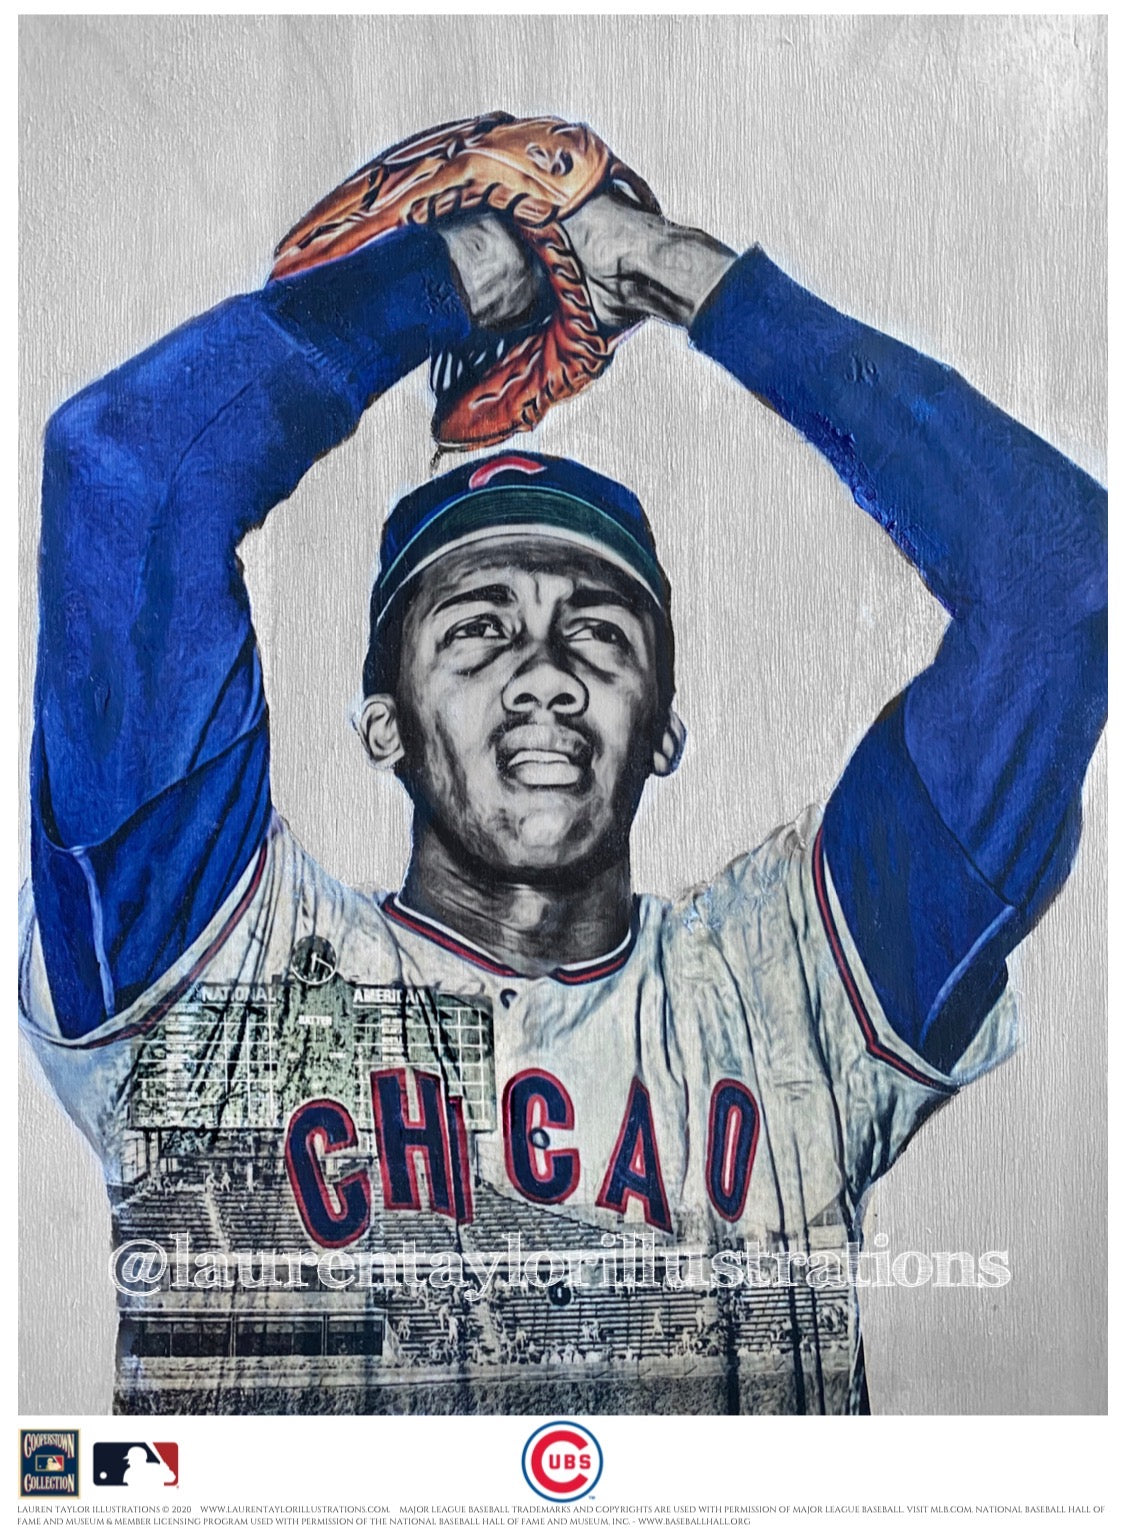 "Fergie" (Fergie Jenkins) Chicago Cubs - Officially Licensed MLB Cooperstown Collection Print - Limited Release